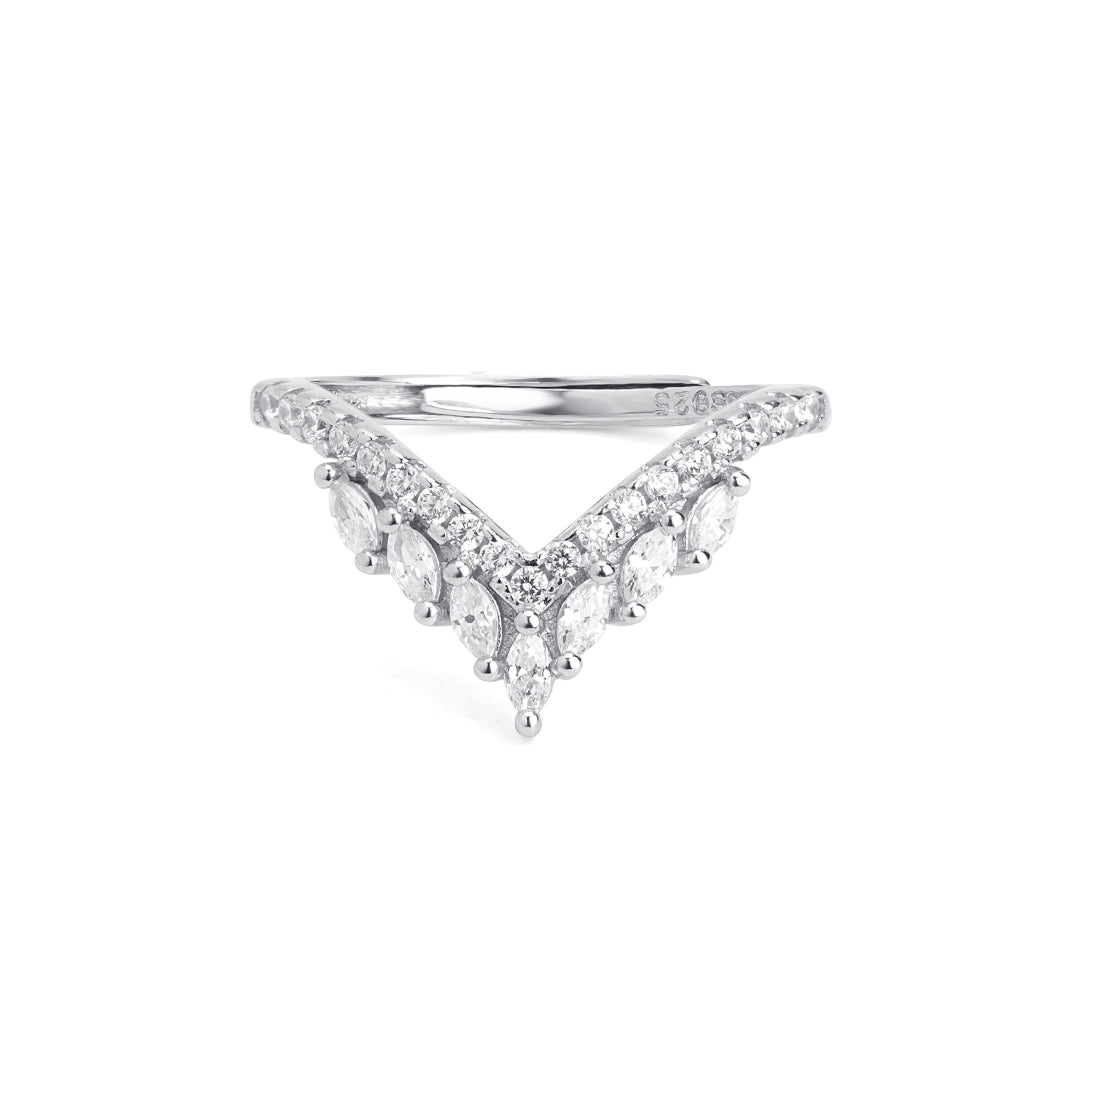 Regal Radiance Rhodium Plated 925 Sterling Silver Women's Ring